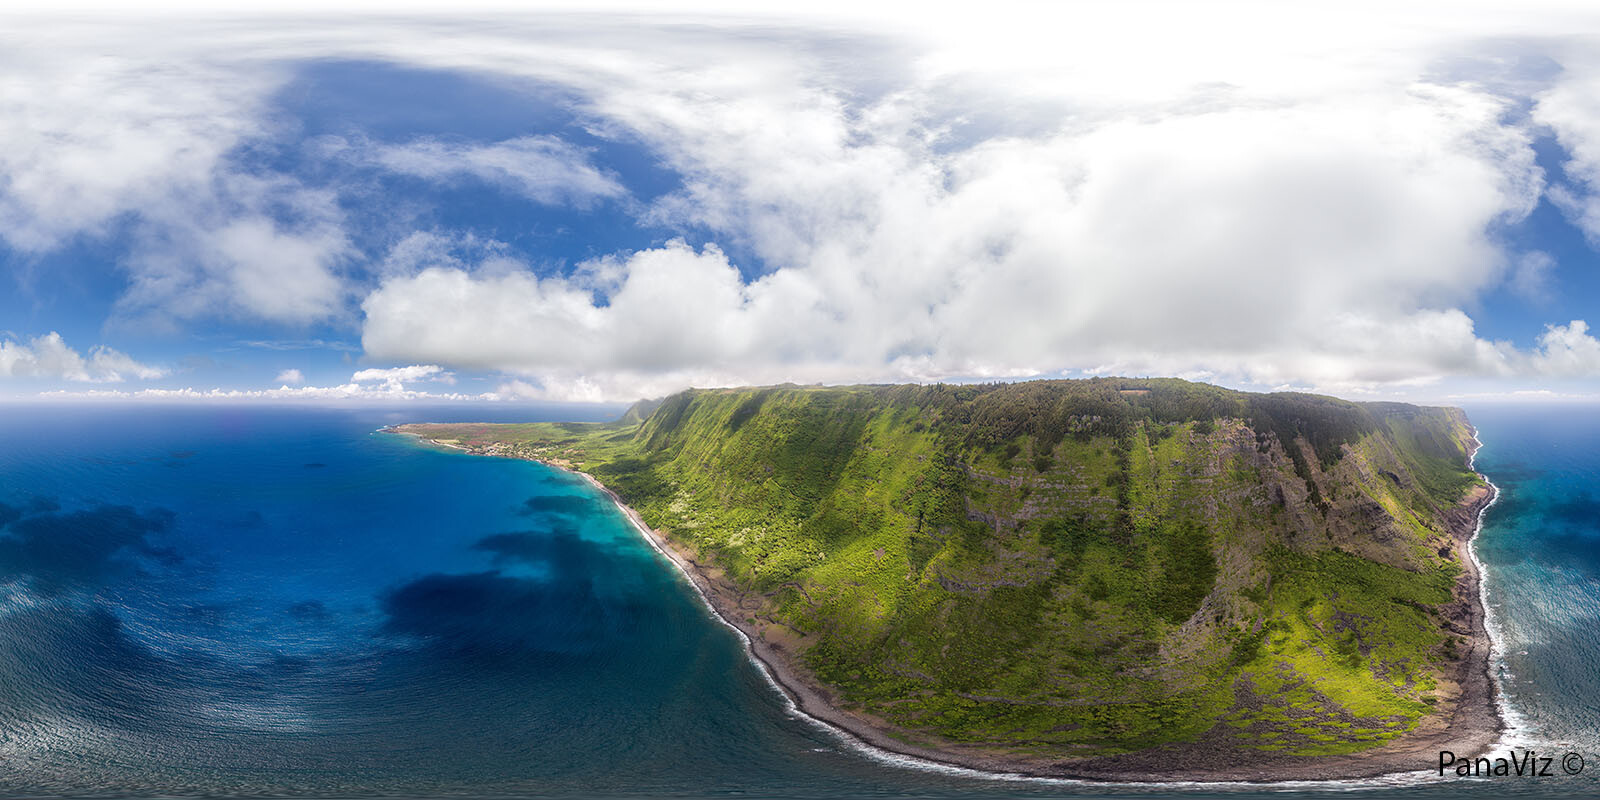 can you visit the island of molokai